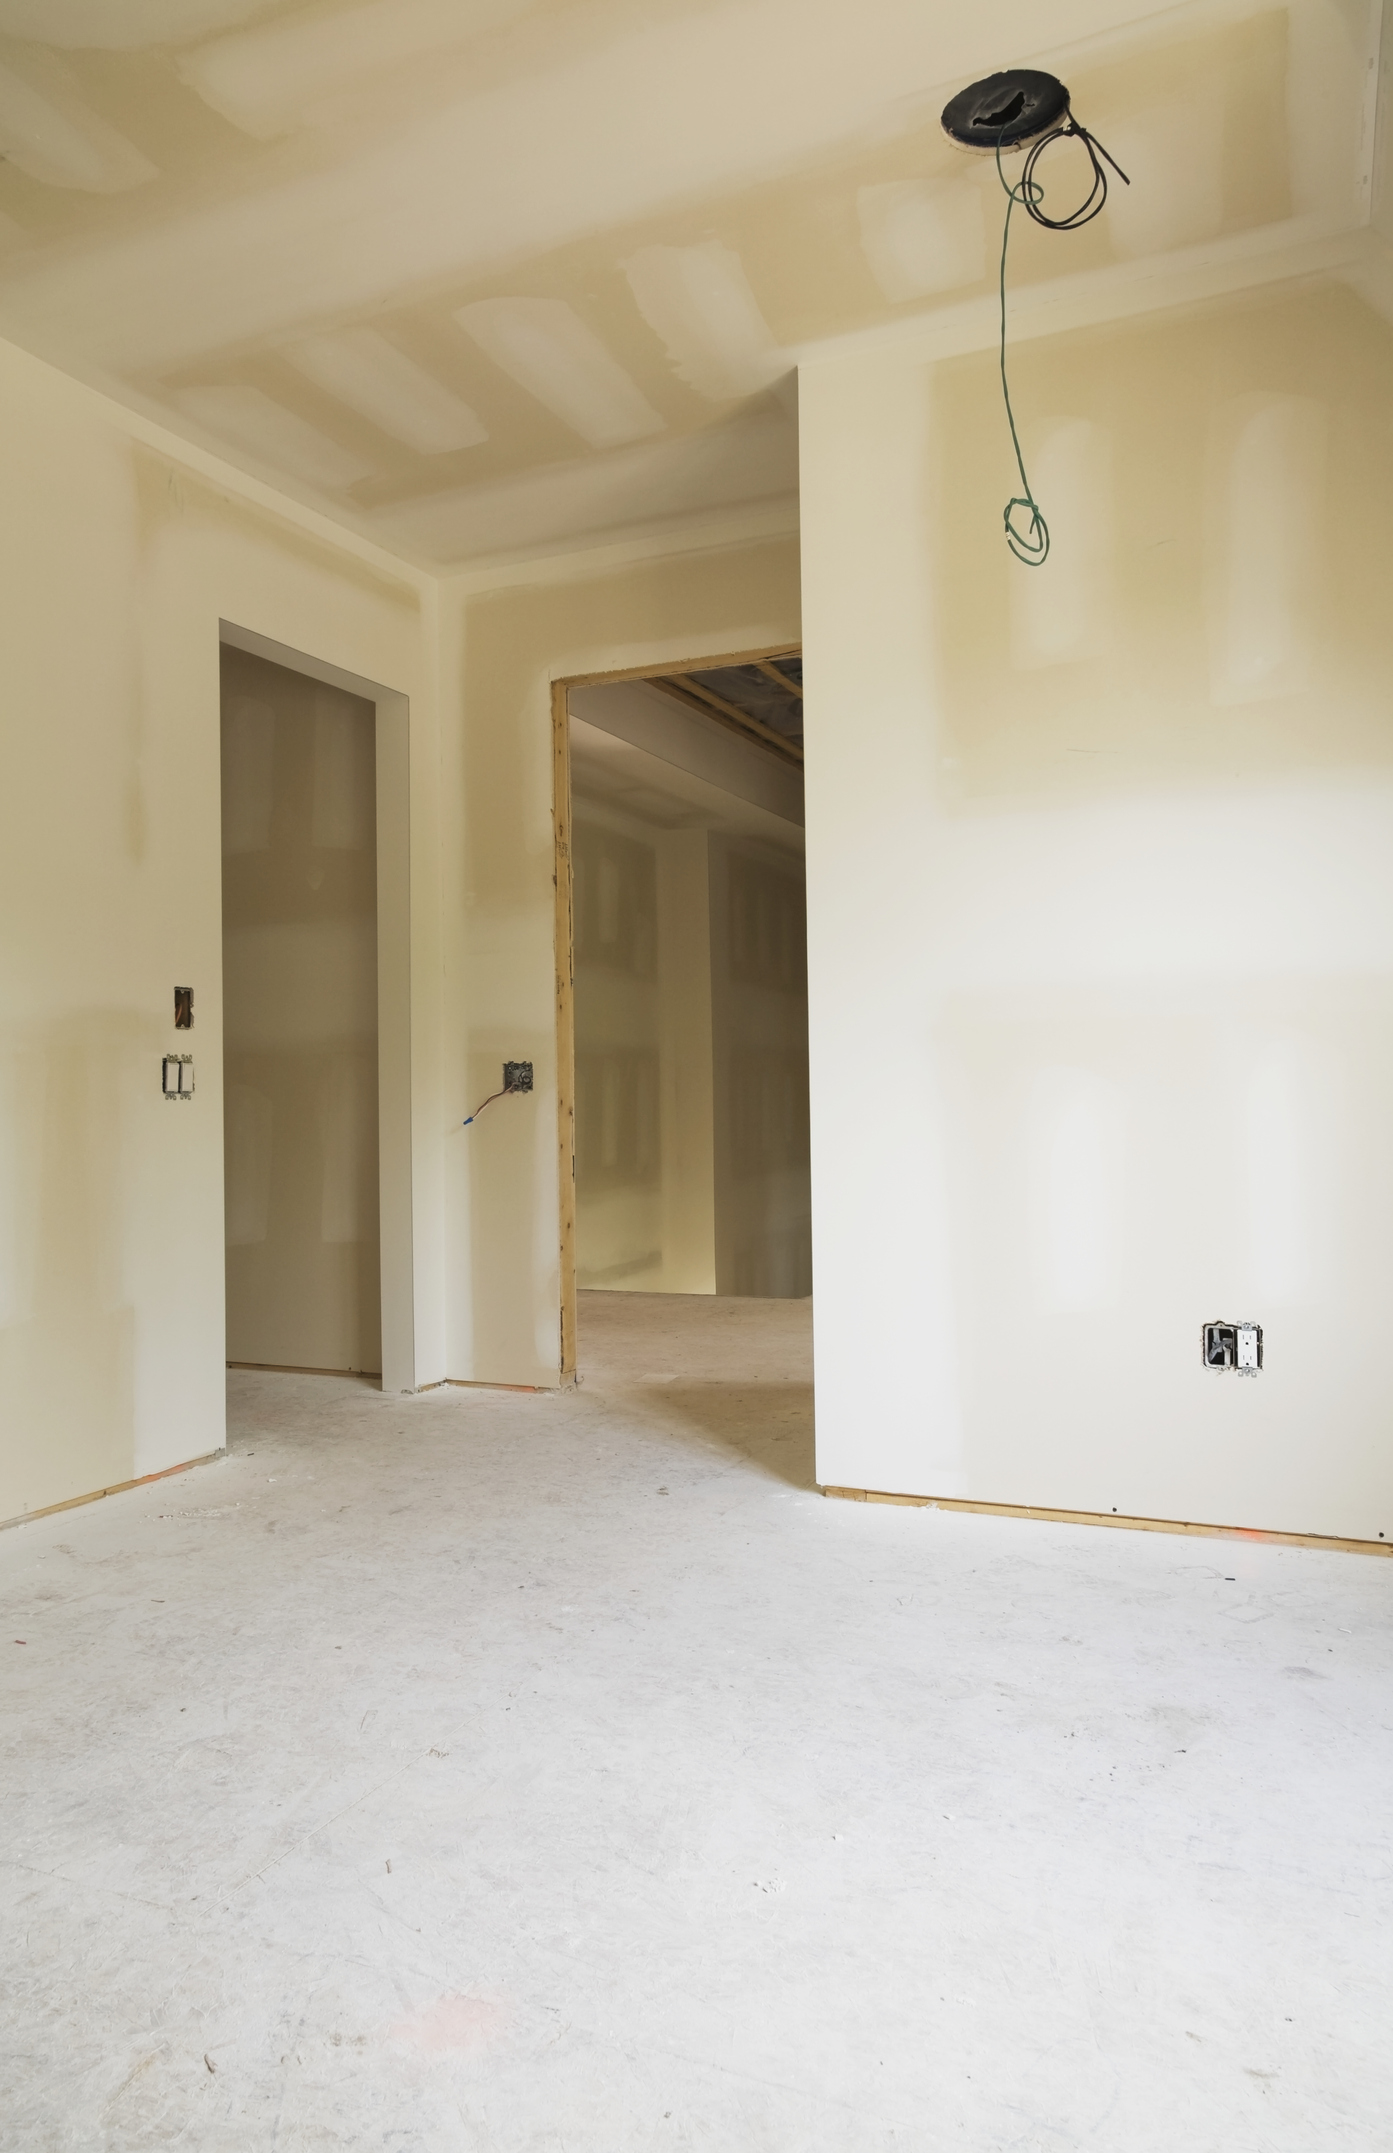 Unfinished room in a residential home; Quebec Canada